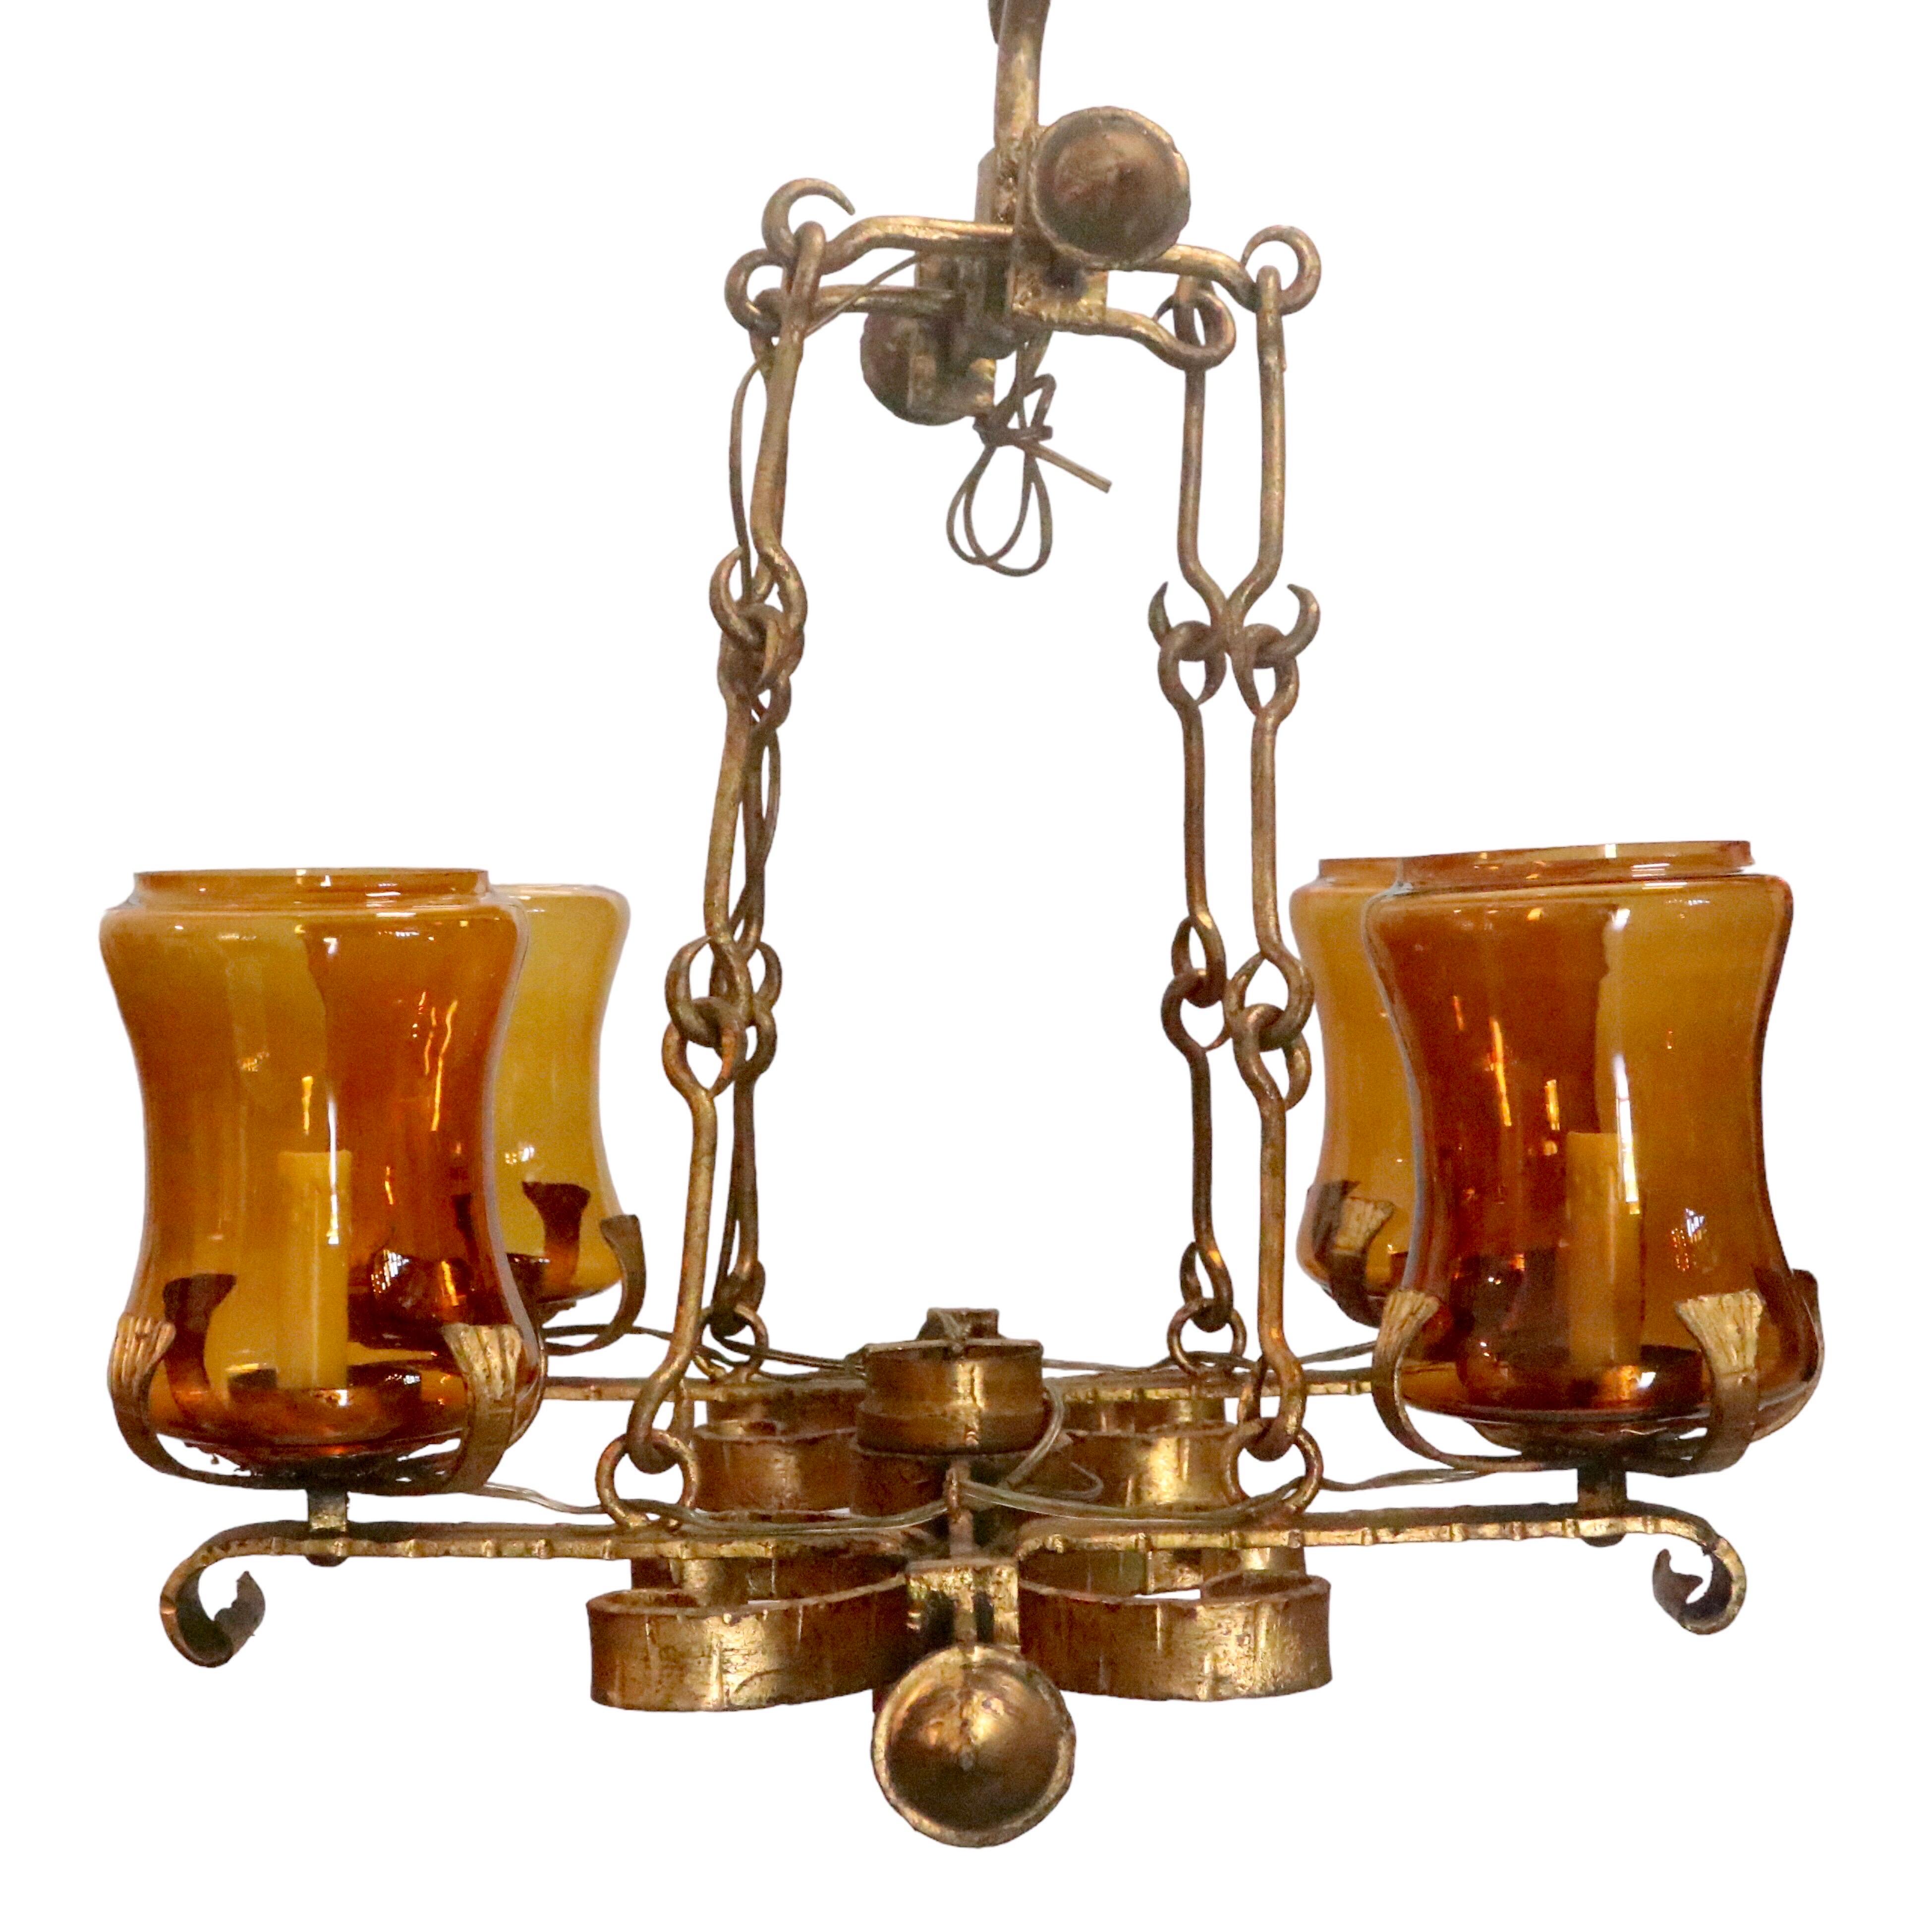 Hand forged wrought Spanish Revival Chandelier.  Elongated shape. Perfect for entryway, living room, kitchen island and dining rooms. 

Features an antique gold finish with gold colored glass hurricane shades.

Fixture Dimensions: 23” Height x 30”